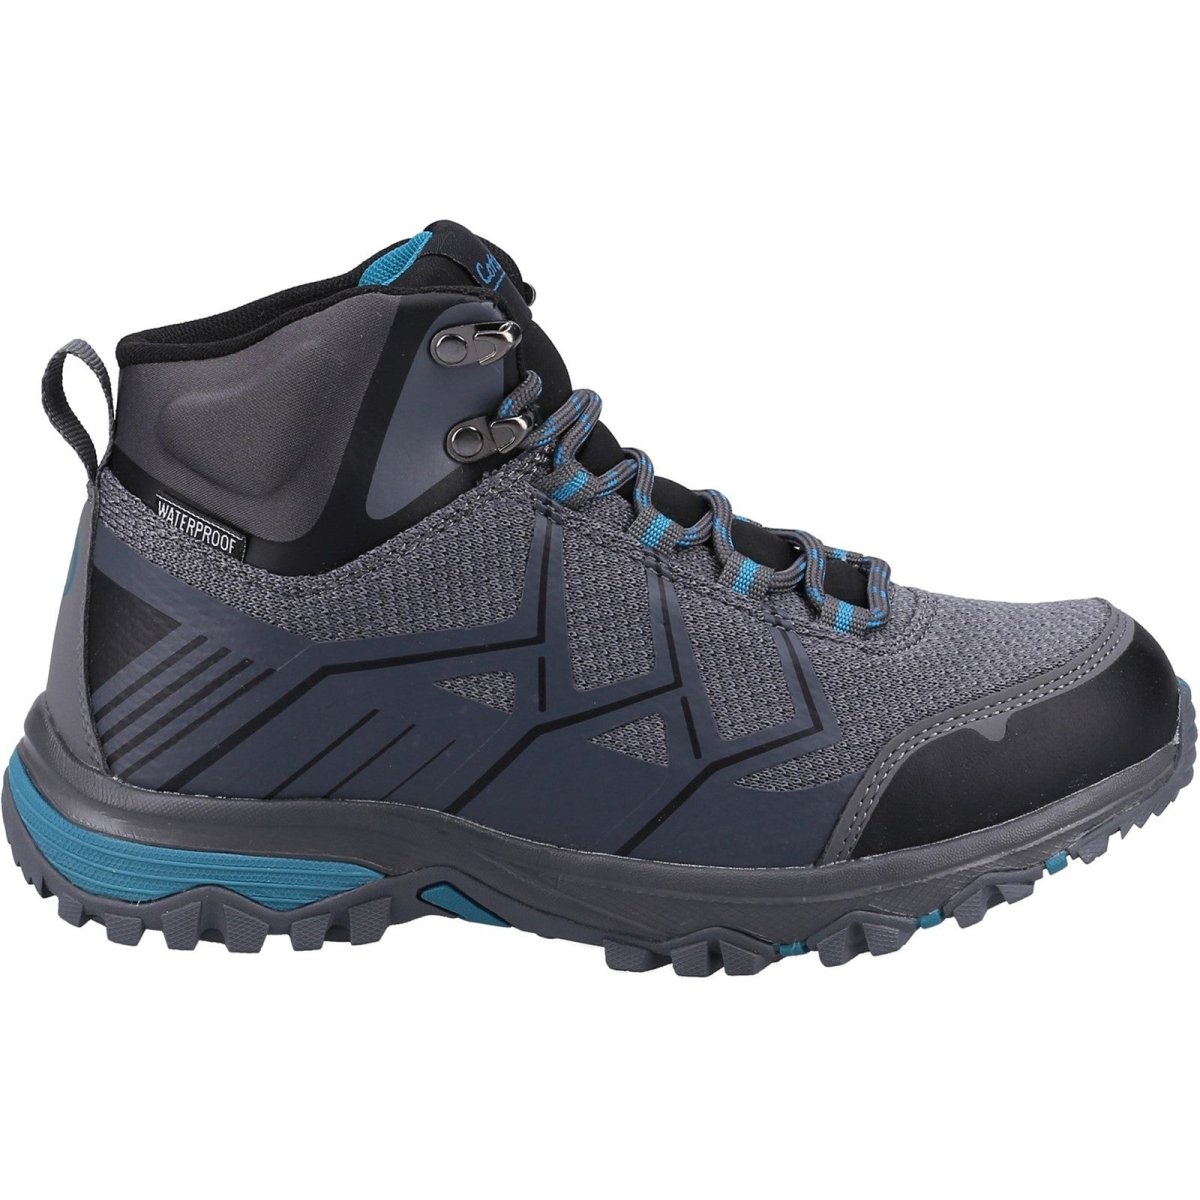 Cotswold Wychwood Mid Ladies Waterproof Hiking Boots - Shoe Store Direct